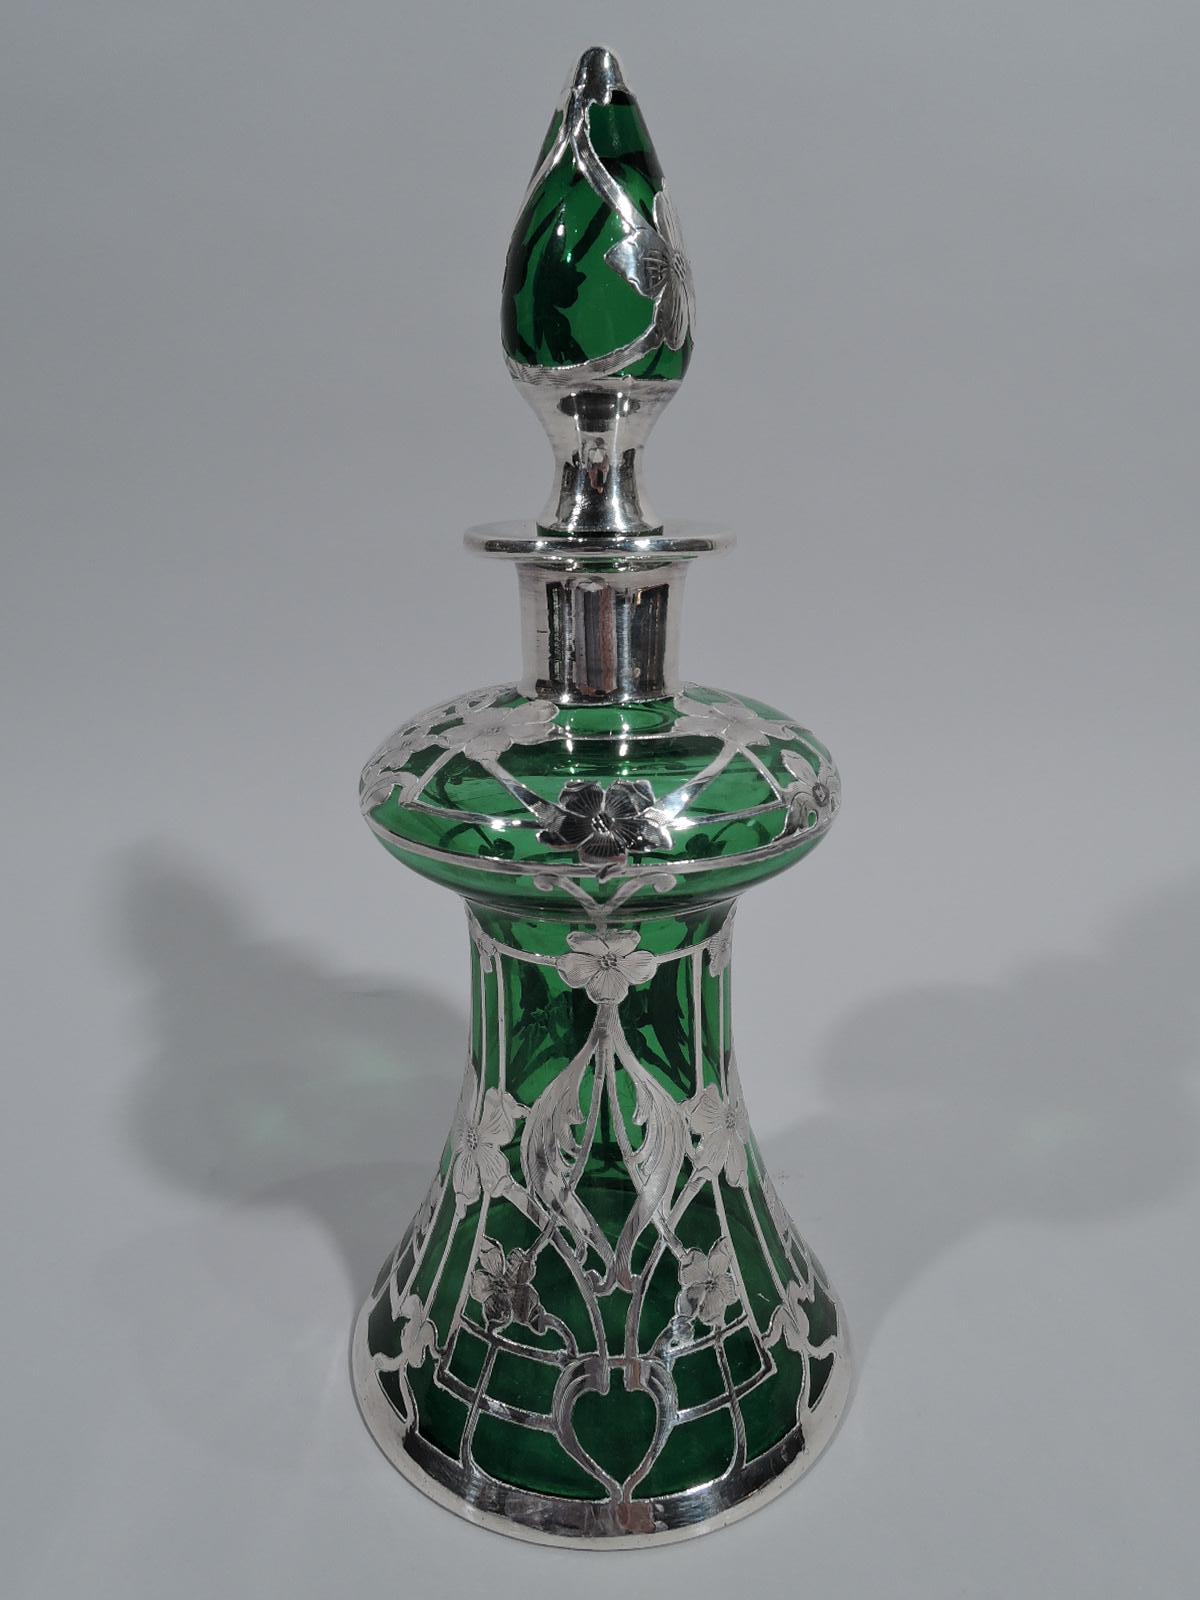 Turn of the century Art Nouveau glass decanter with engraved silver overlay. Unusual form with conical body, bellied top, straight and inset neck, and flat everted rim. Stopper oval. Overlay in form of rectilinear trellis with flower heads and